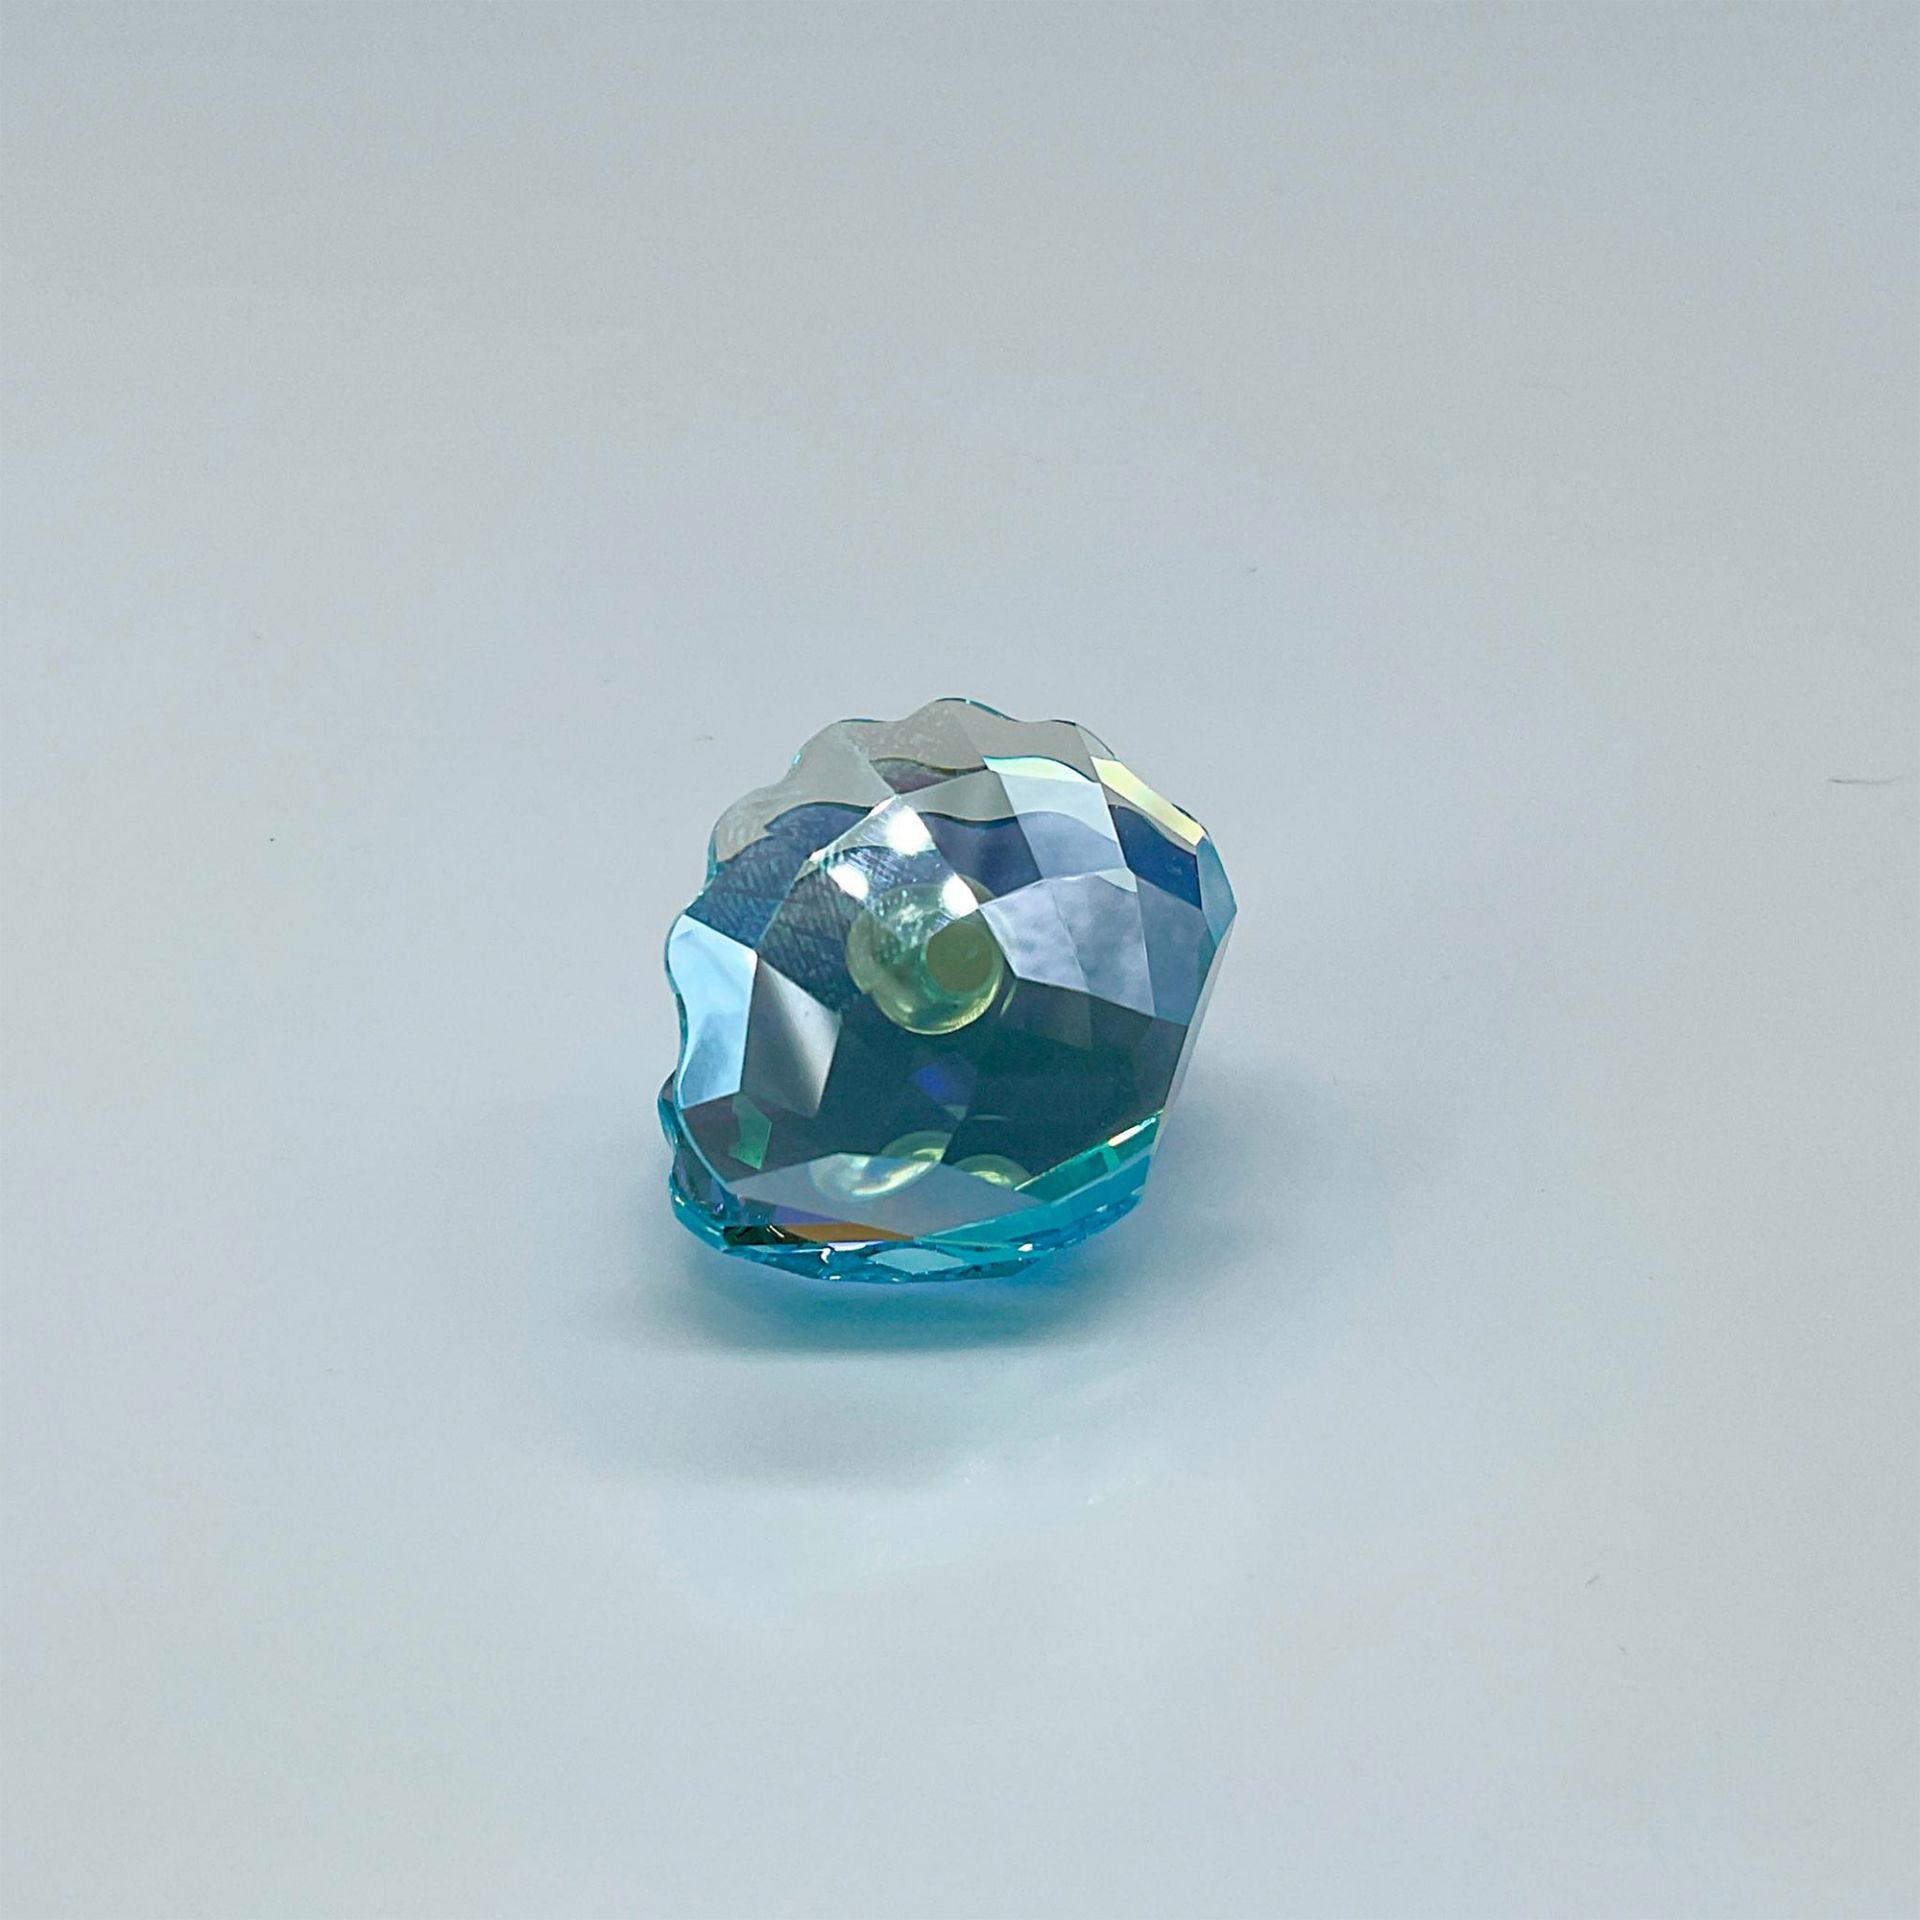 Swarovski Crystal Figurine, Small Blue Shell with Pearl - Image 2 of 4